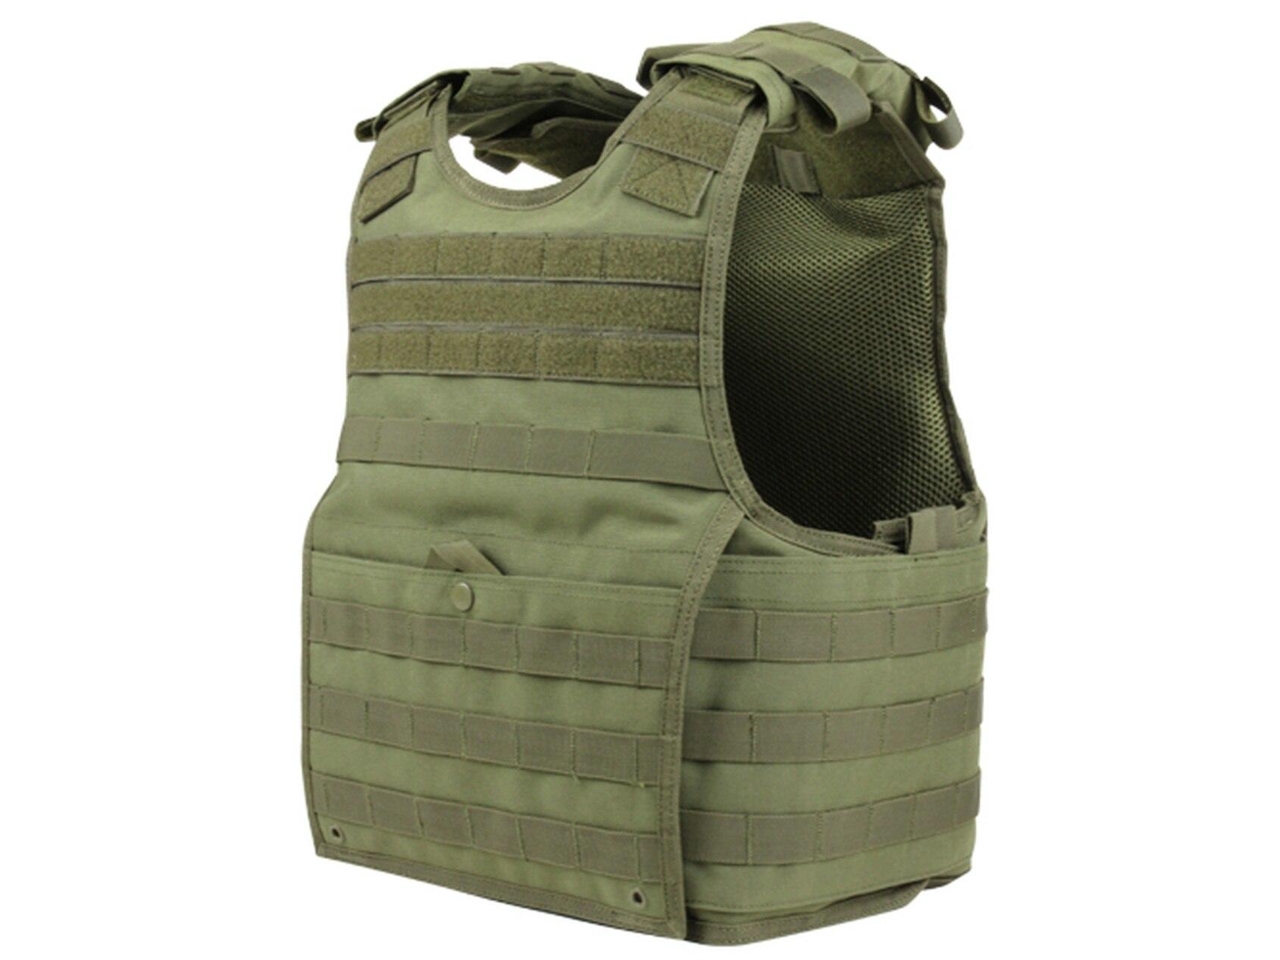 Condor MOLLE Exo Plate Carrier - L/XL, Olive Drab, Large